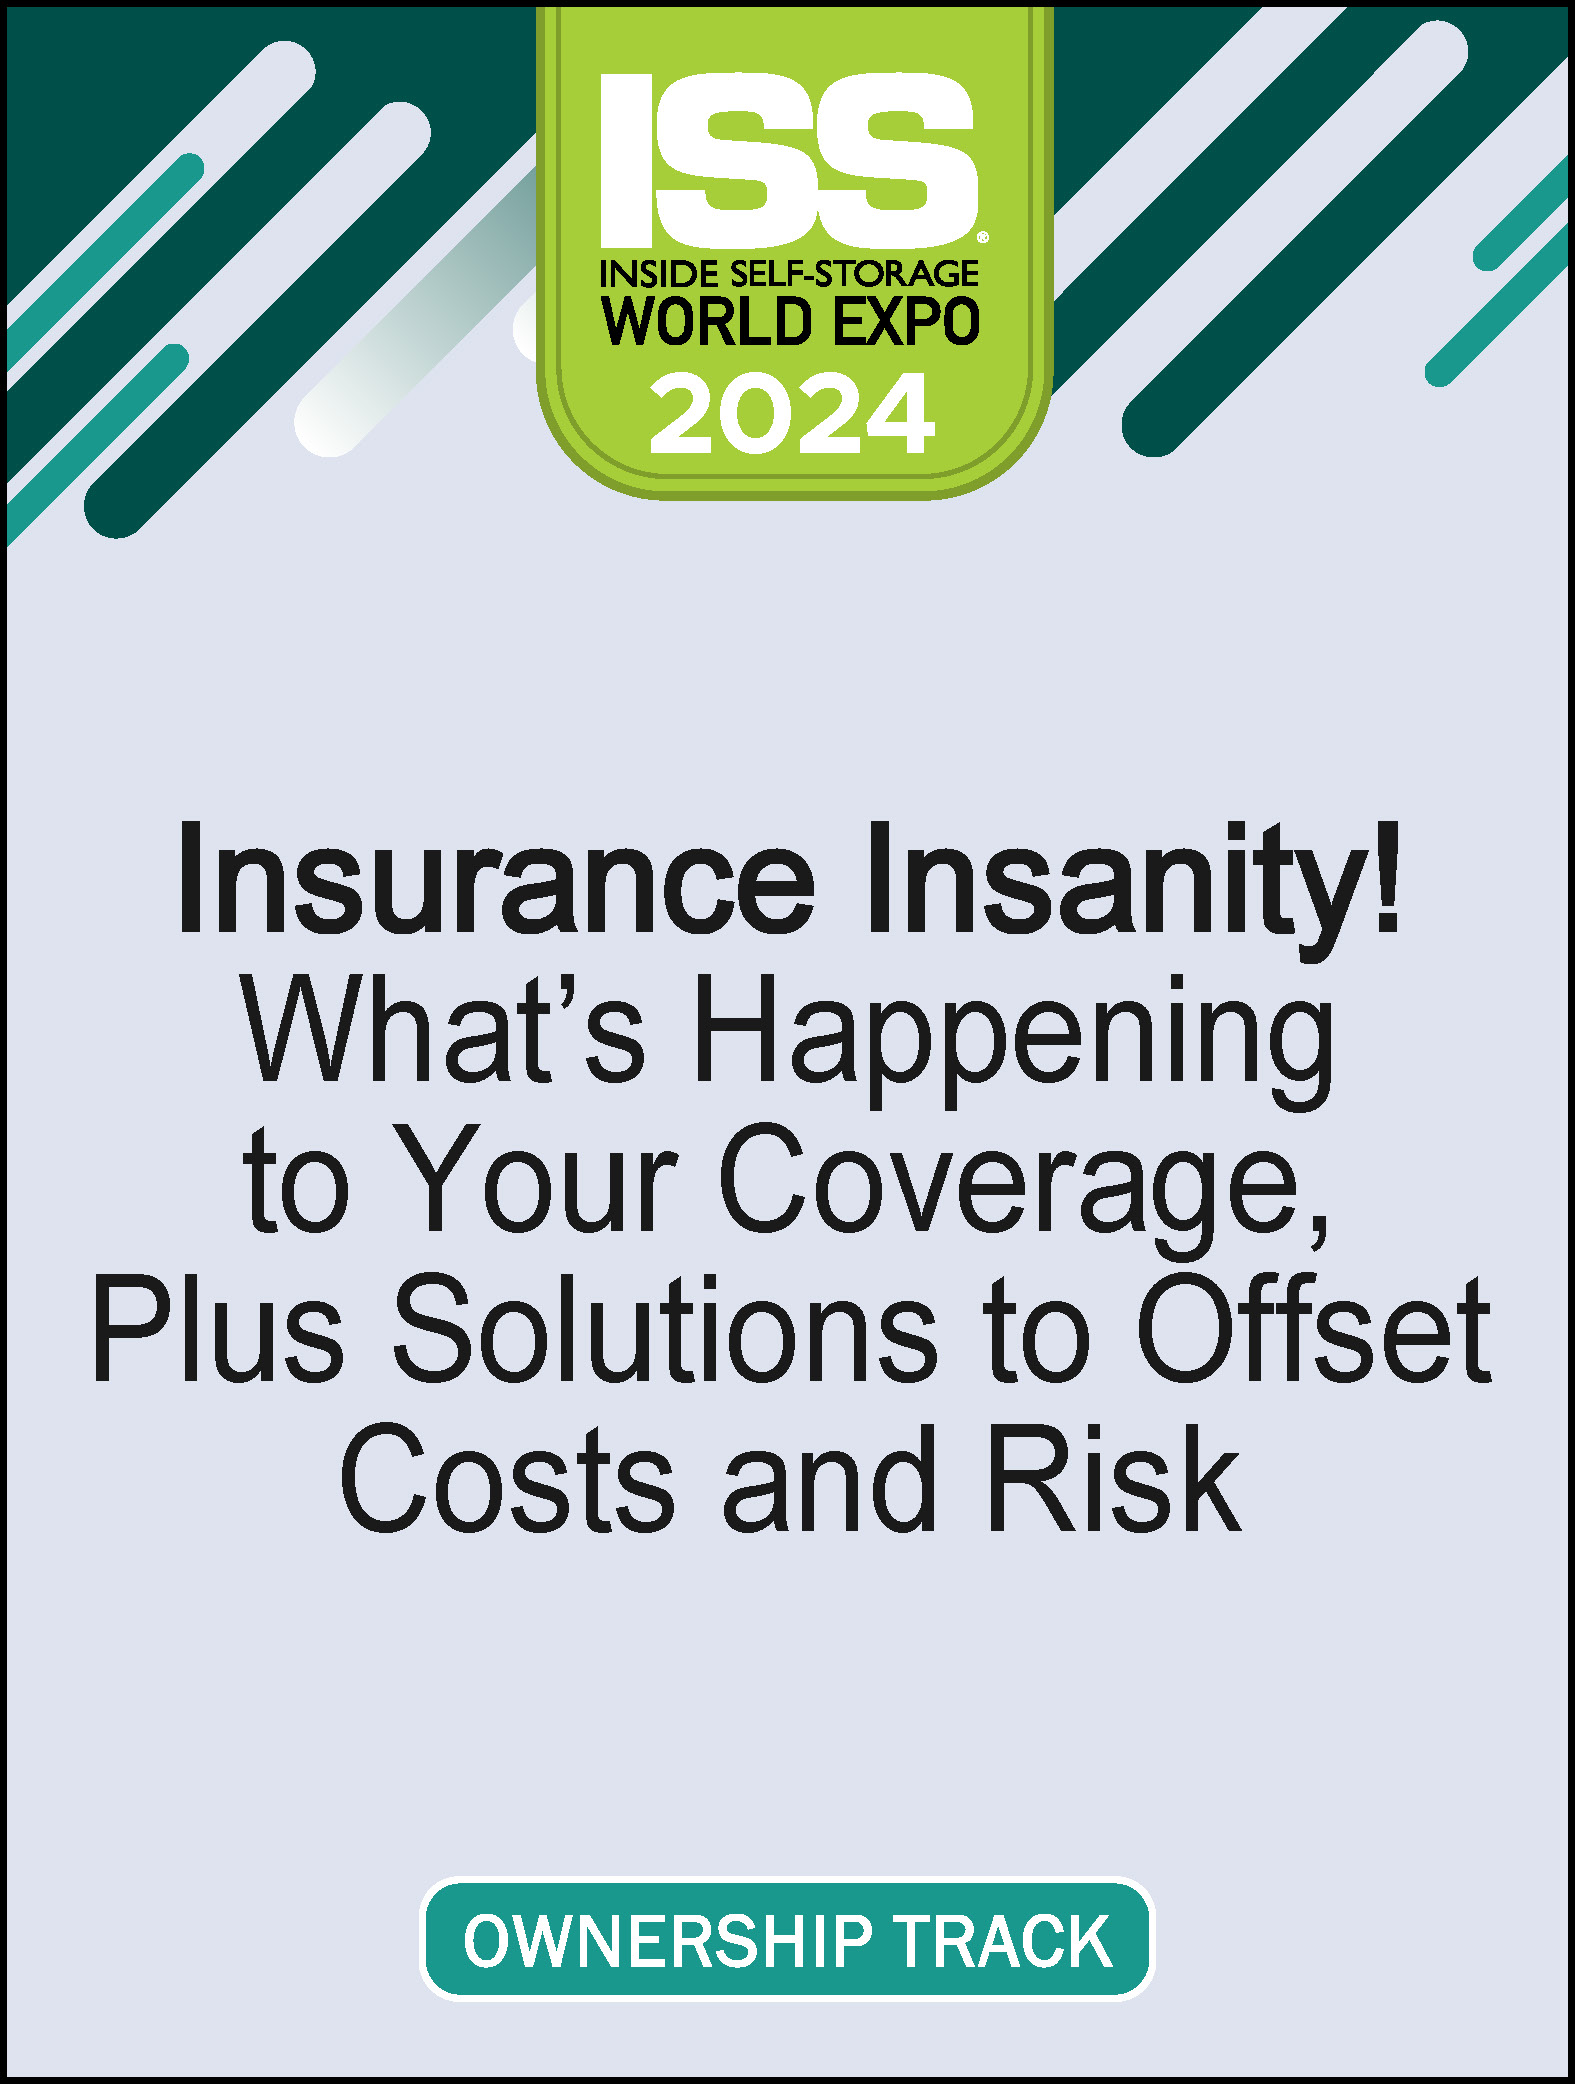 Video Pre-Order Sub - Insurance Insanity! What’s Happening to Your Coverage, Plus Solutions to Offset Costs and Risk